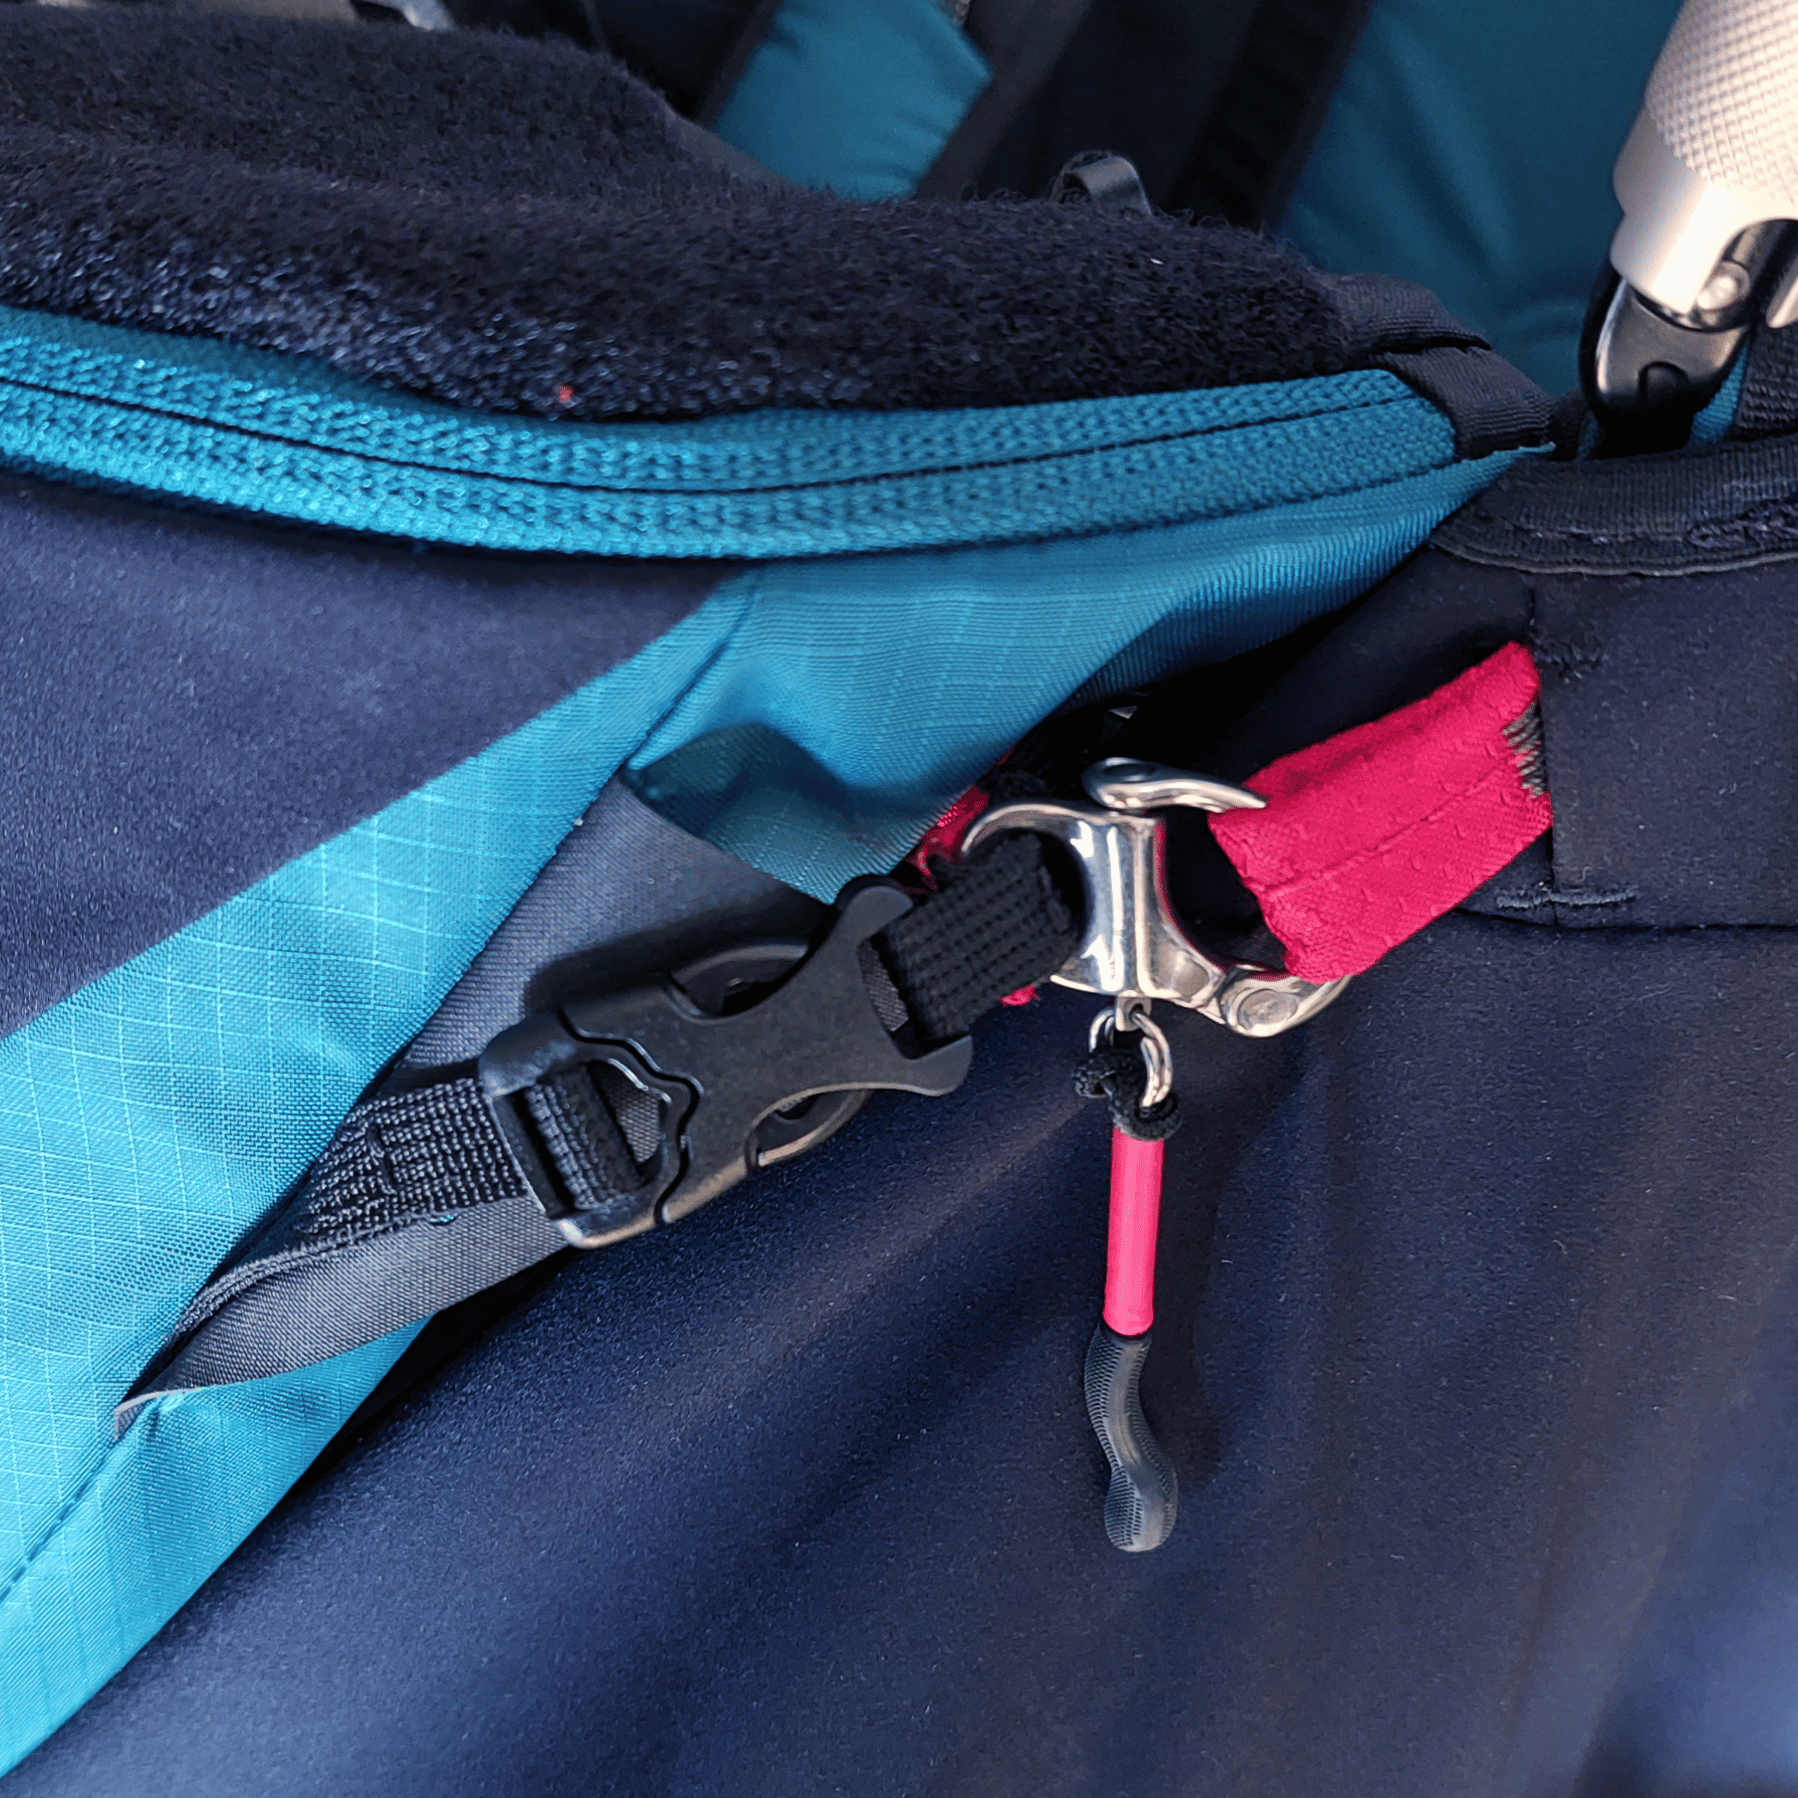 how to attach backpack strap to buckle, loop through clasp, strap